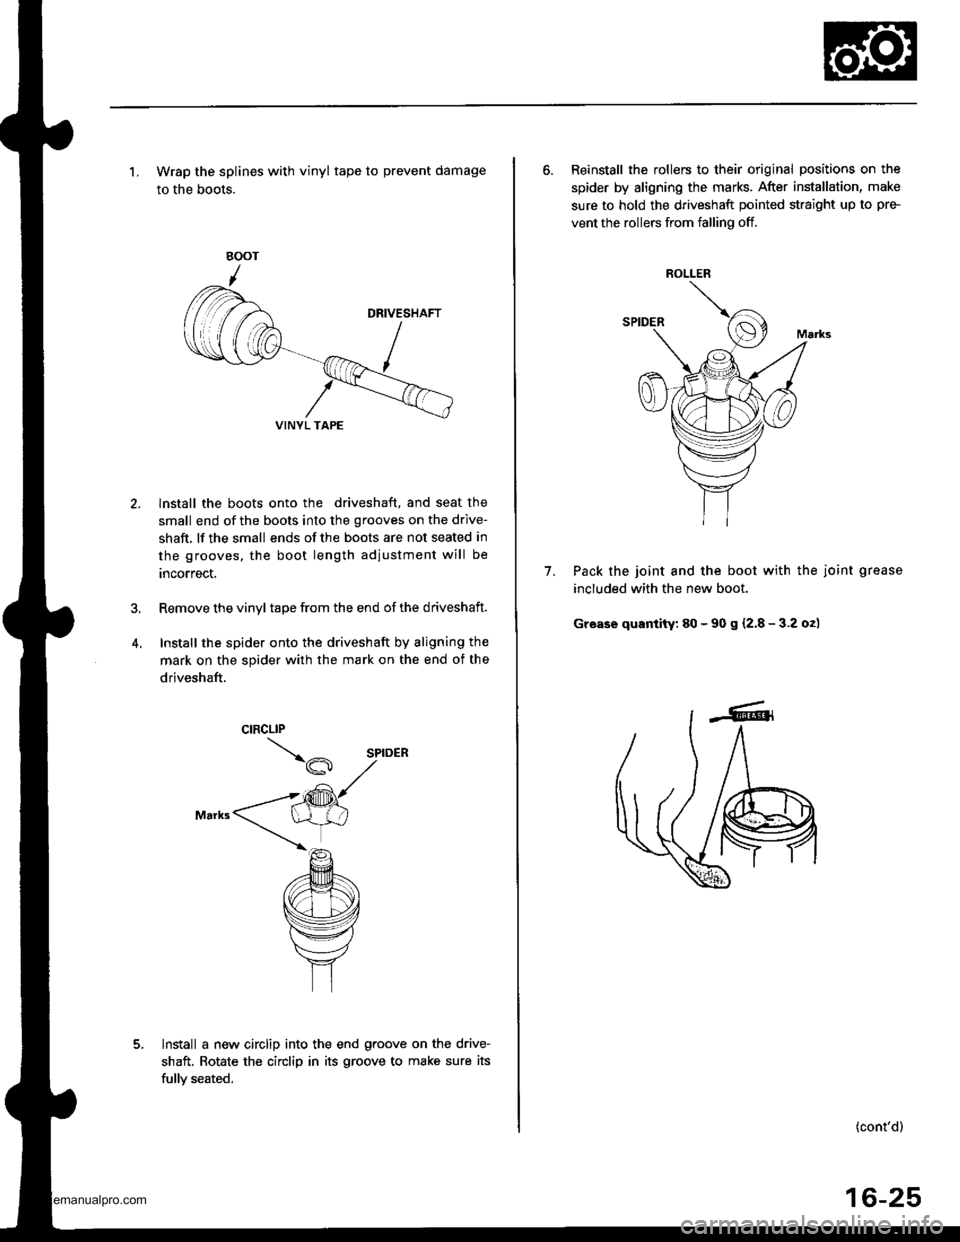 HONDA CR-V 1999 RD1-RD3 / 1.G Workshop Manual 
1. Wrap the splines with vinyl tape to prevent damage
to the boots.
lnstall the boots onto the driveshaft, and seat the
small end of the boots into the grooves on the drive-
shaft, lf the small ends